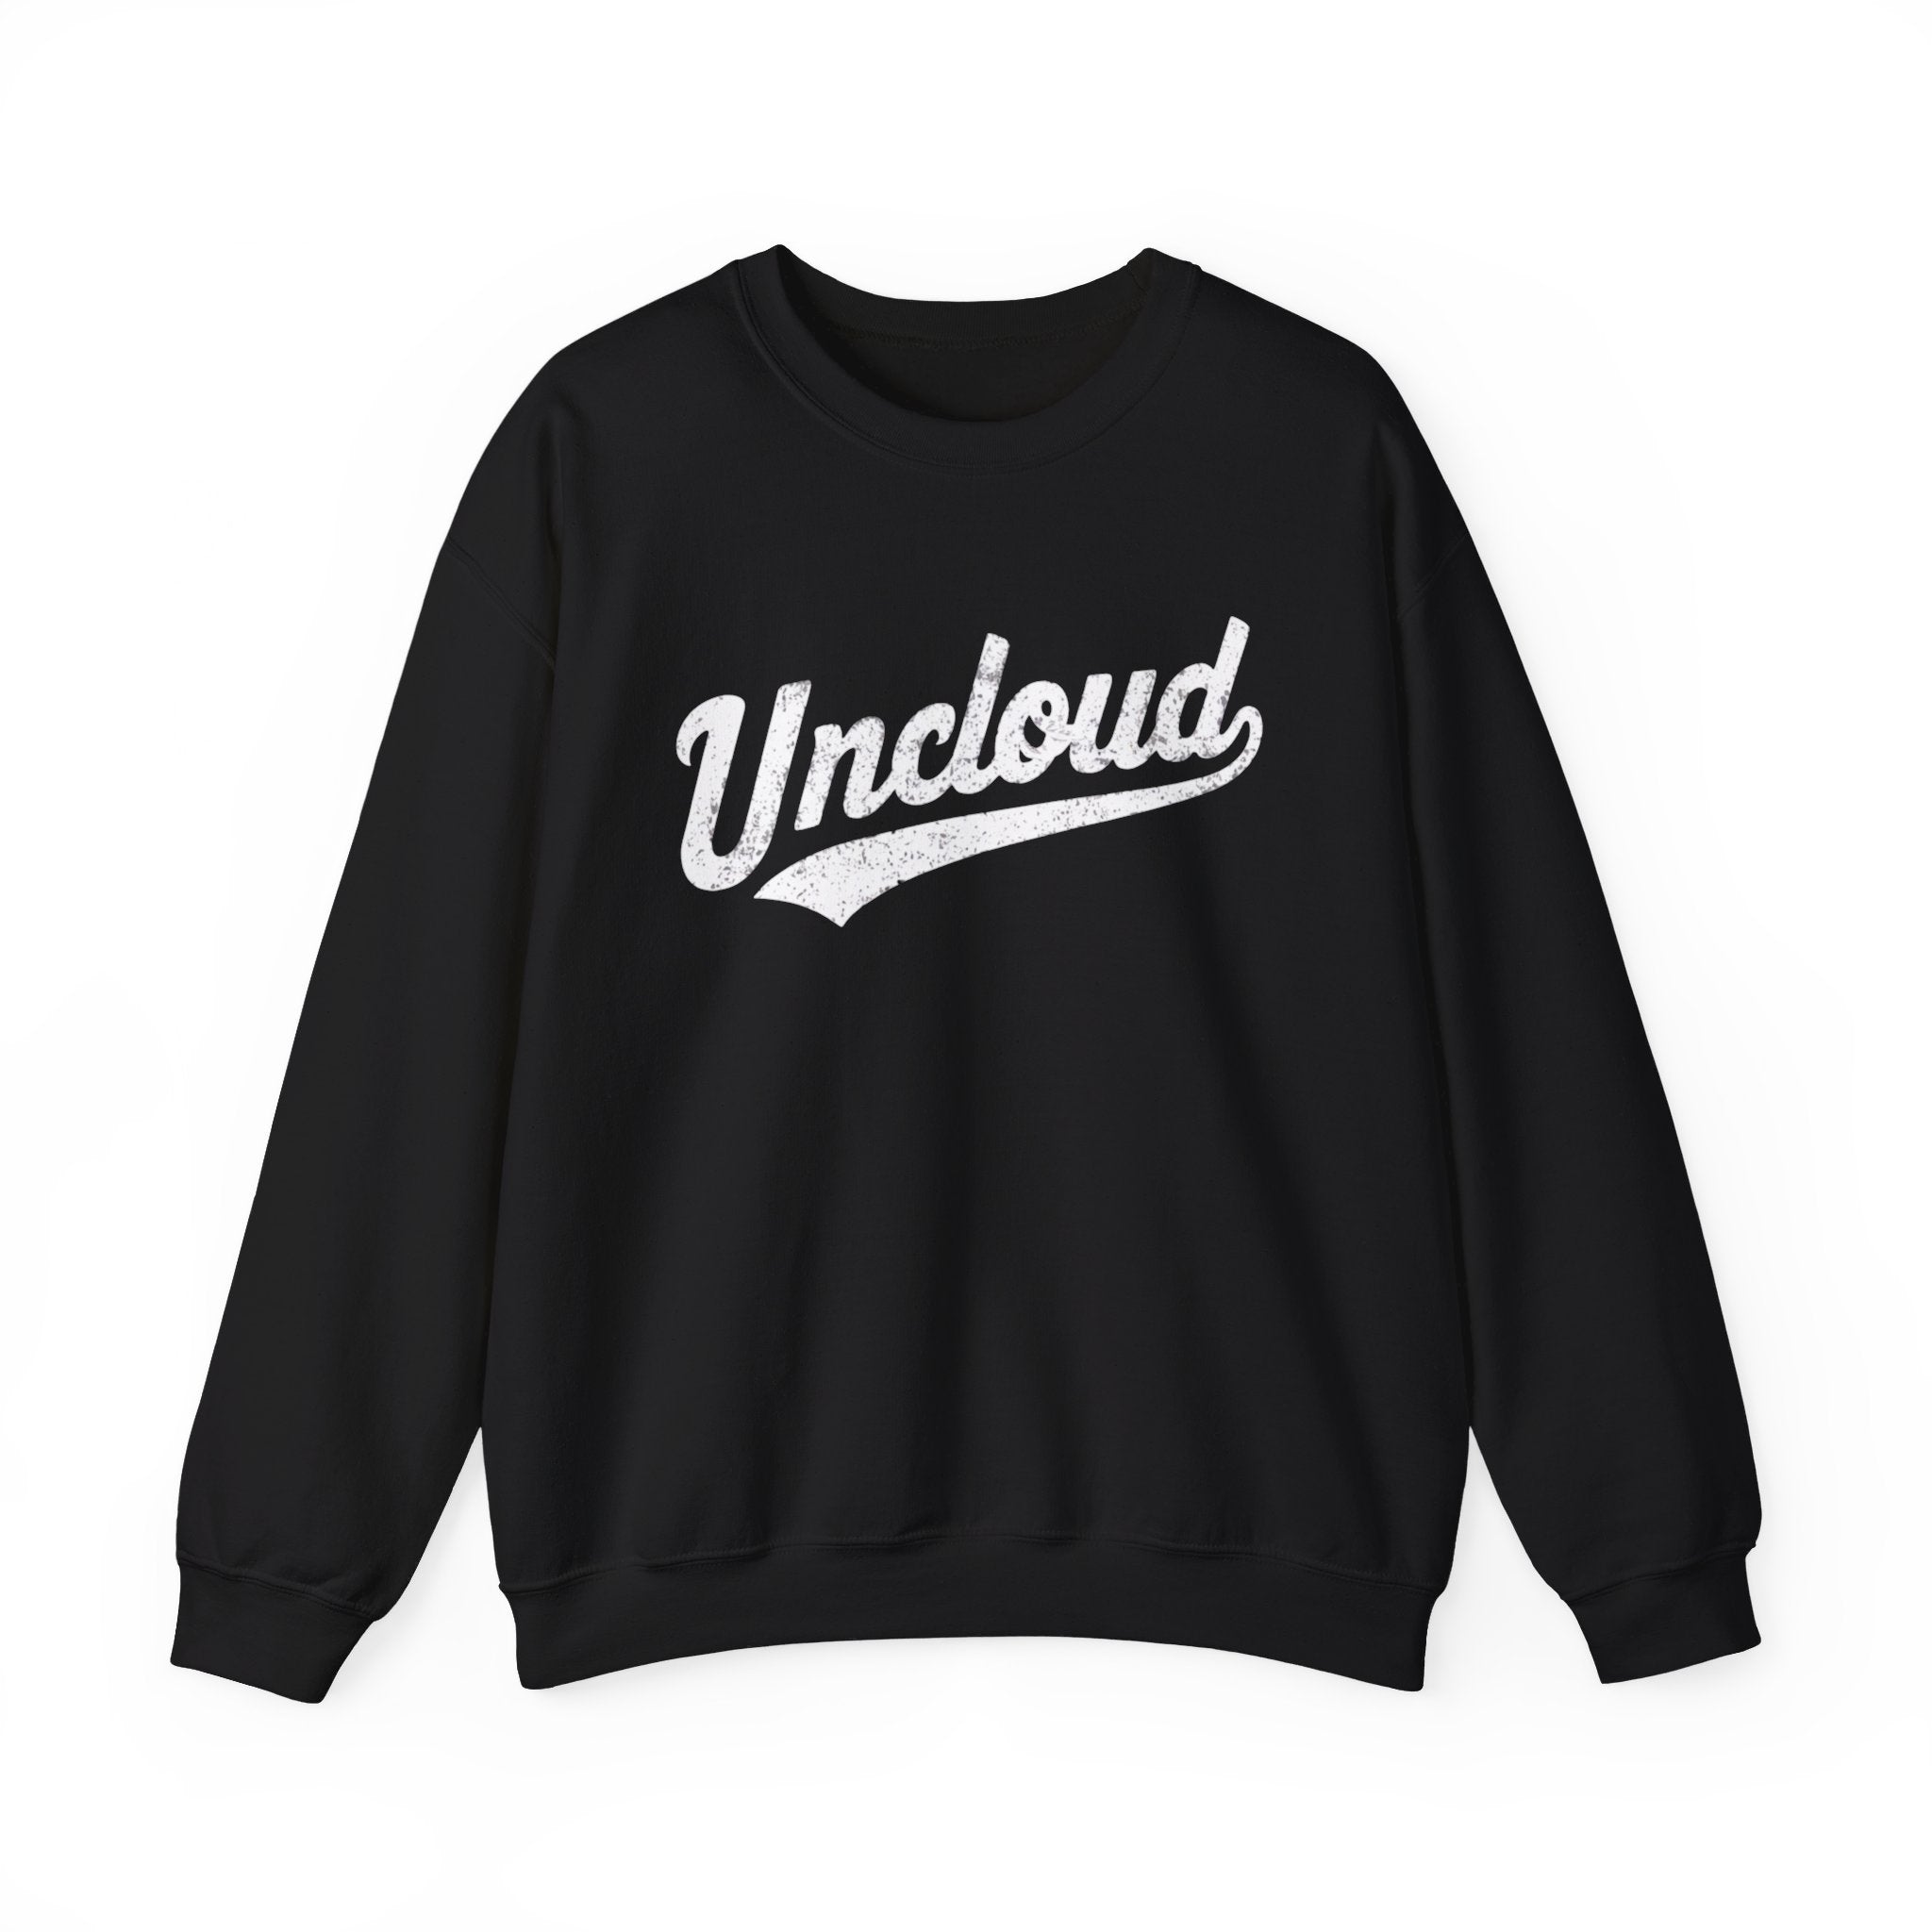 Black crewneck Uncloud - Sweatshirt with the word "Uncloud" printed in white, cursive-style font across the front, offering comfort and style that's cozy and warm.